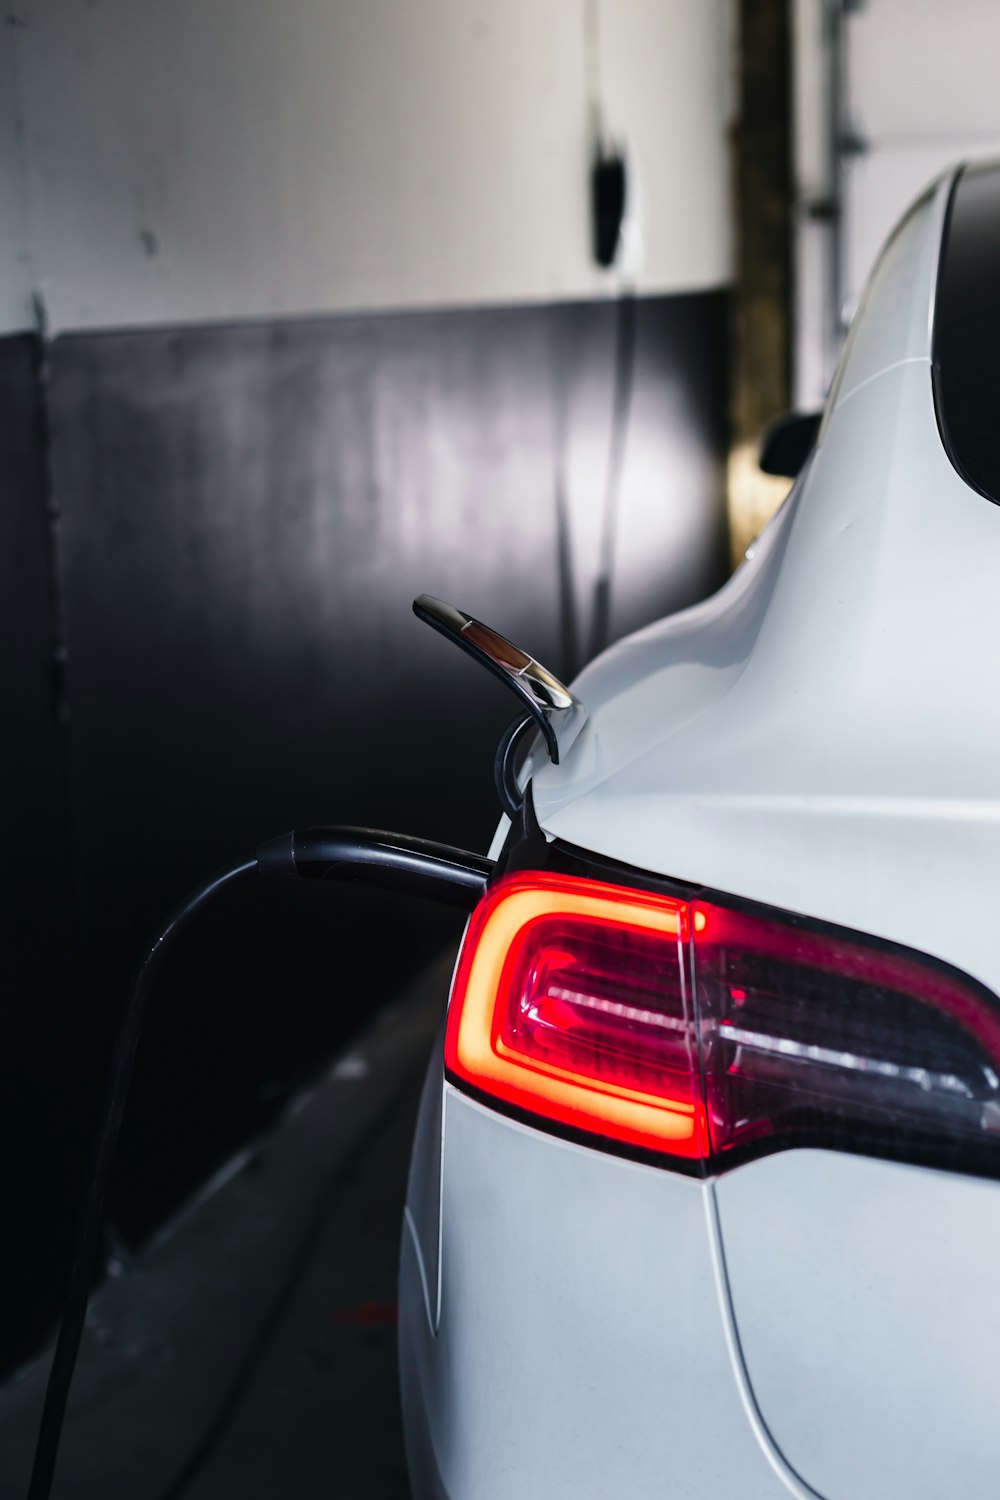 the tail light of a white car is shown